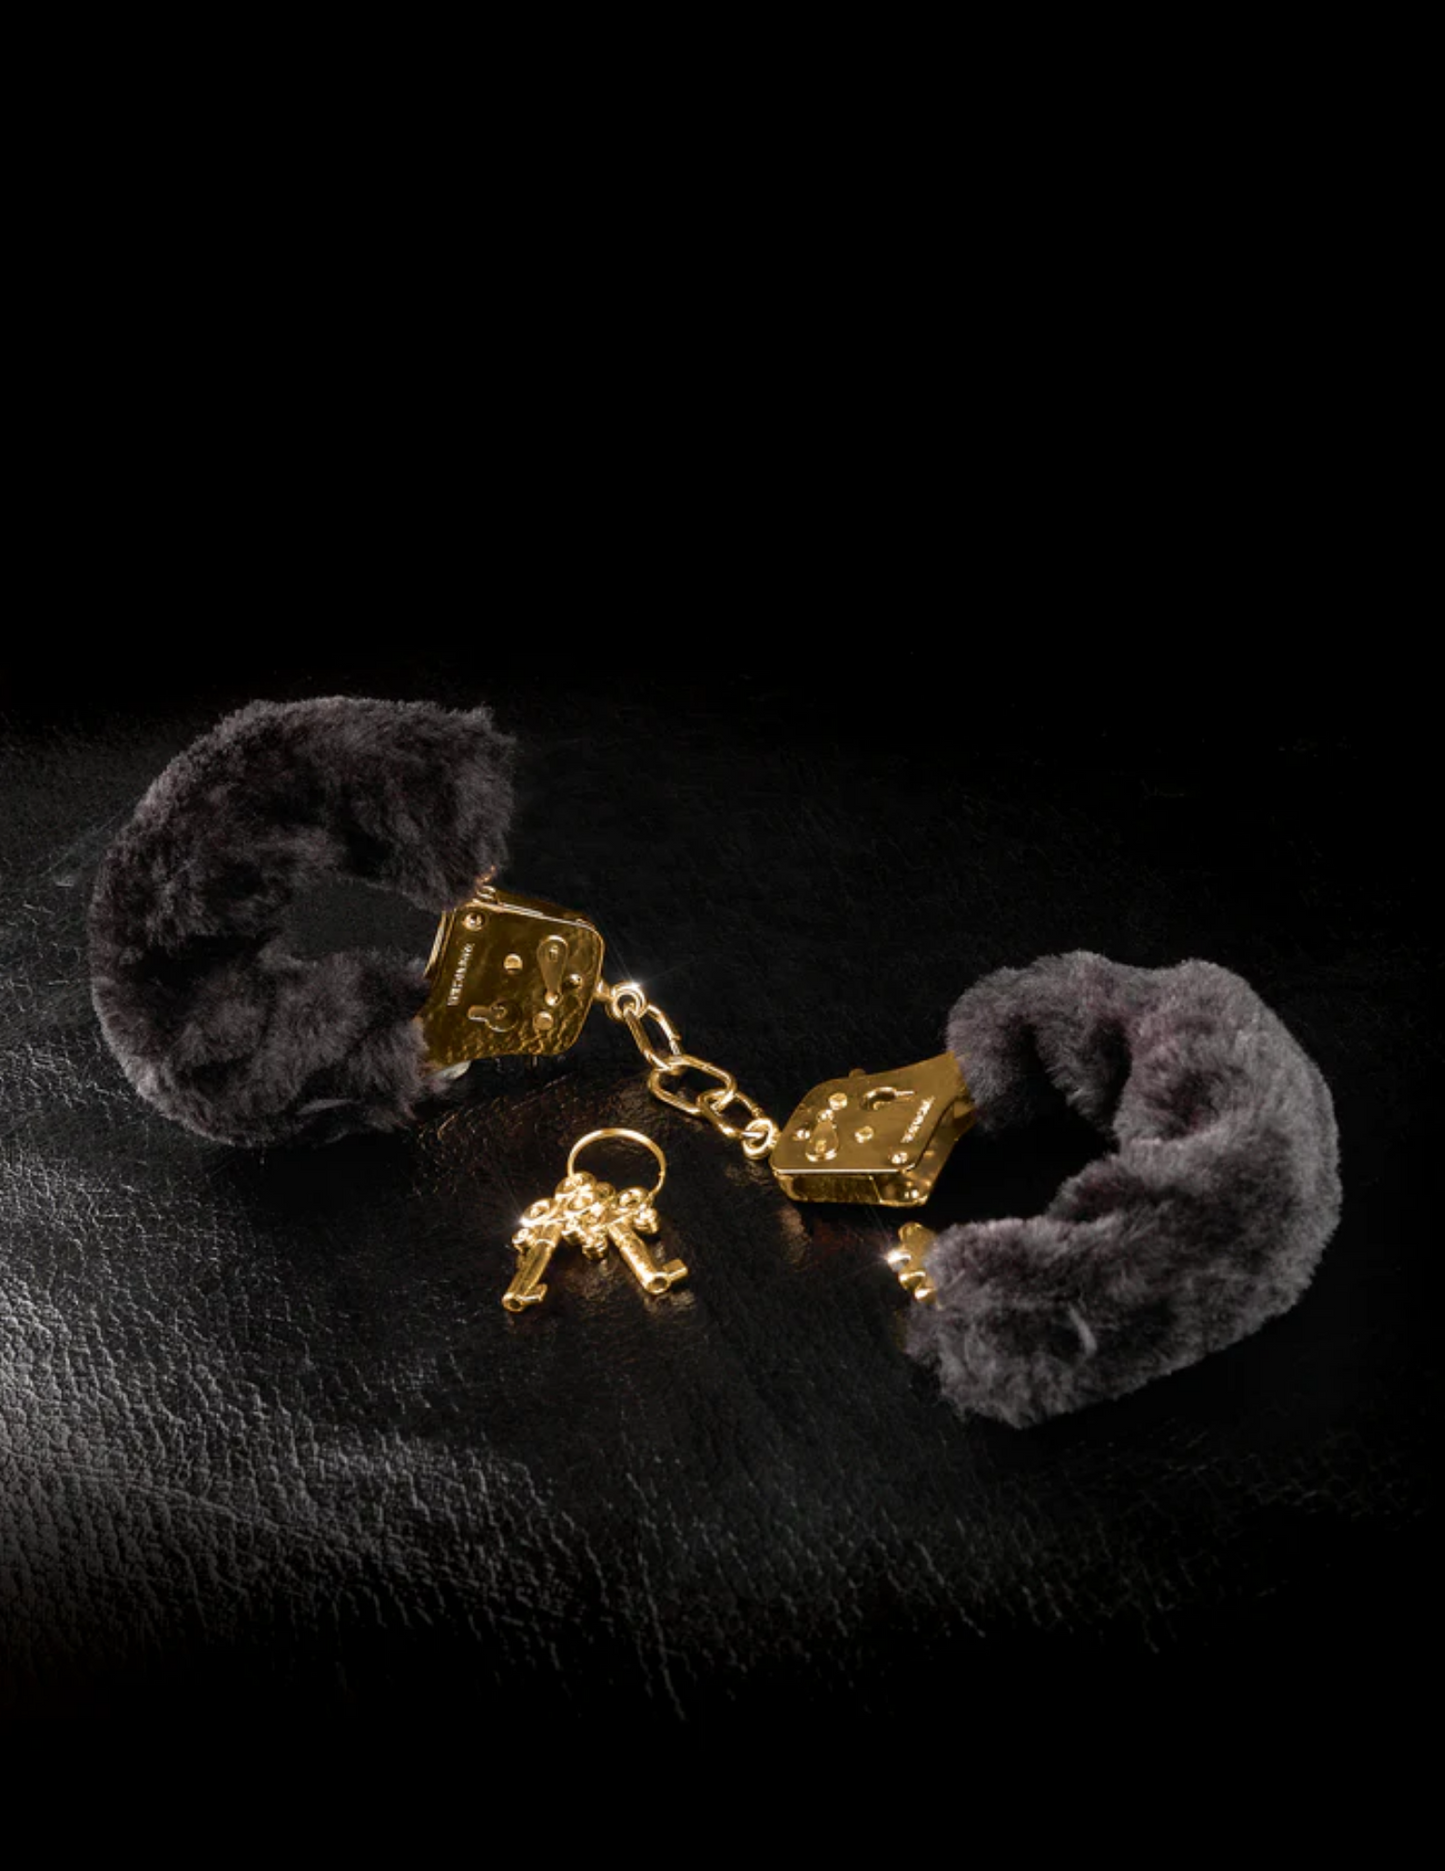 Photo of the Fetish Fantasy Gold Deluxe Furry Cuffs from Pipedreams (black/gold) showing off its gold hardware.